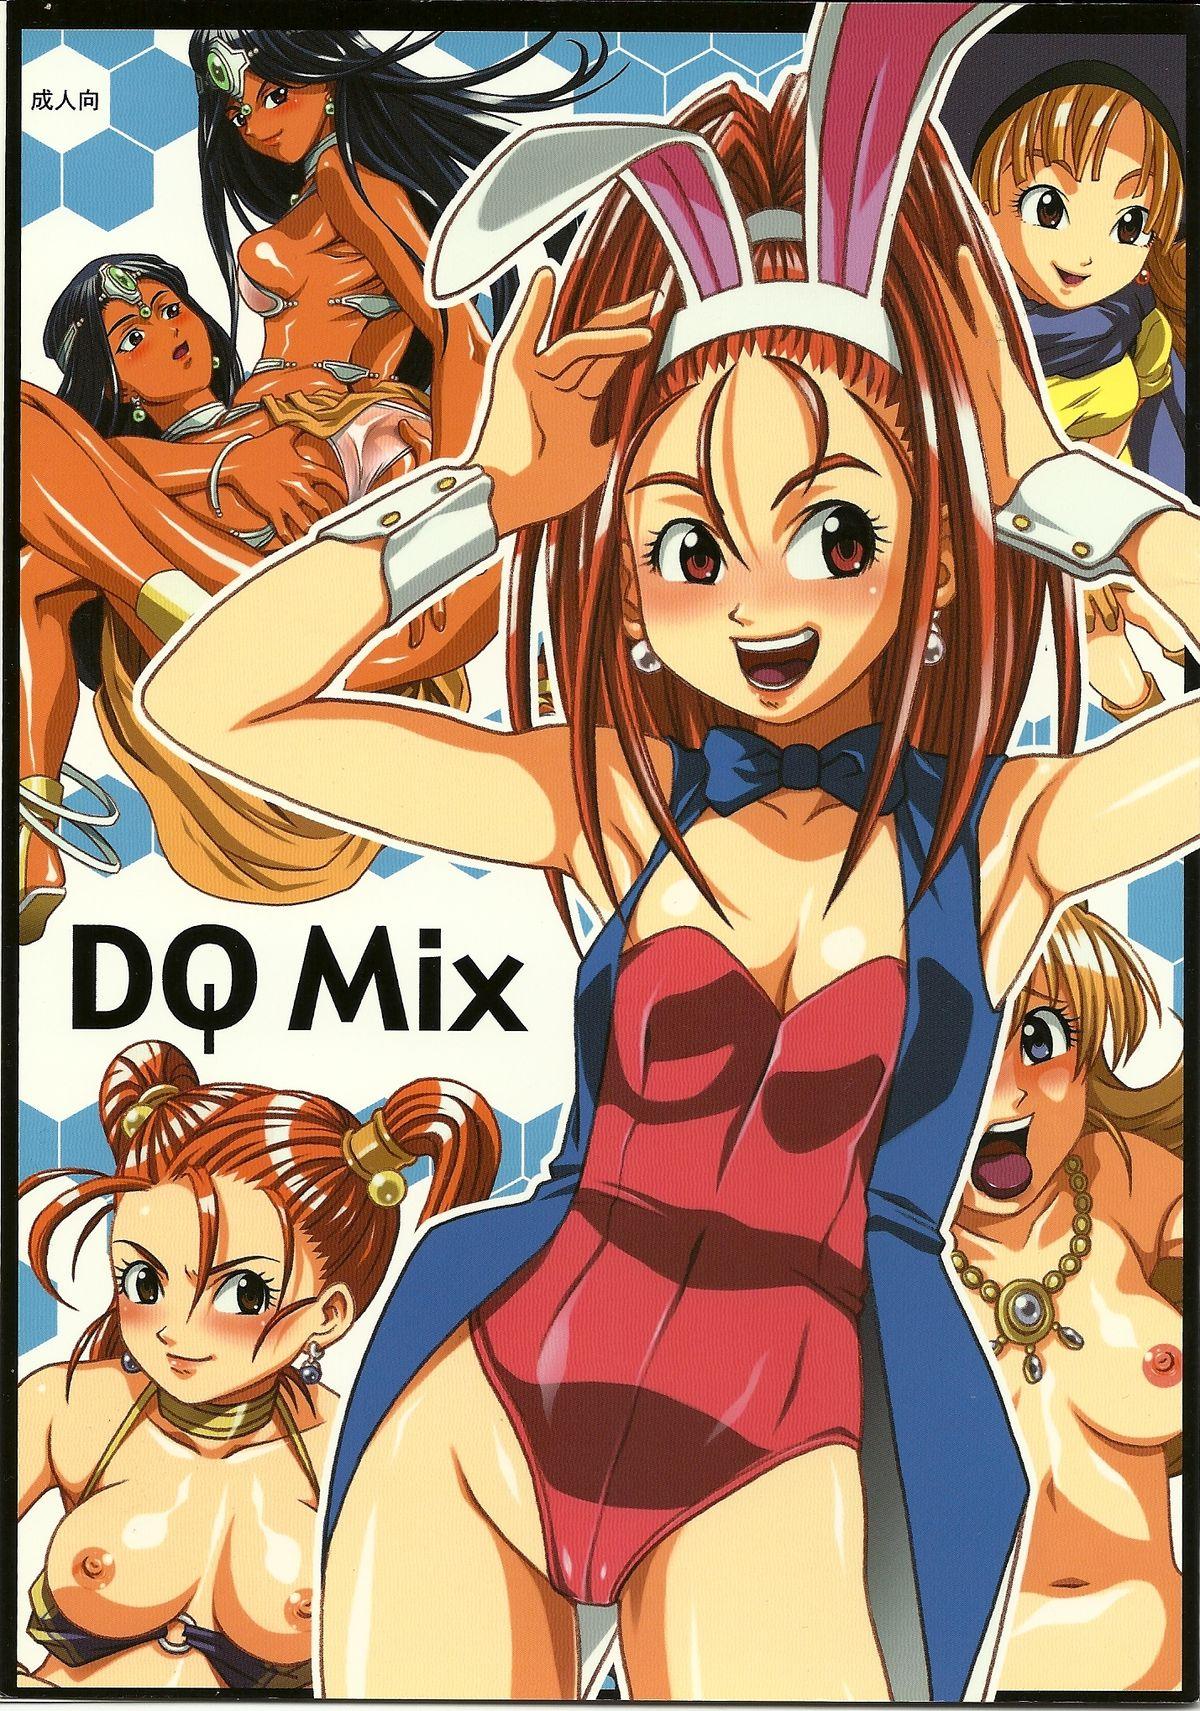 Transexual DQ Mix - Dragon quest iv Man - Page 1